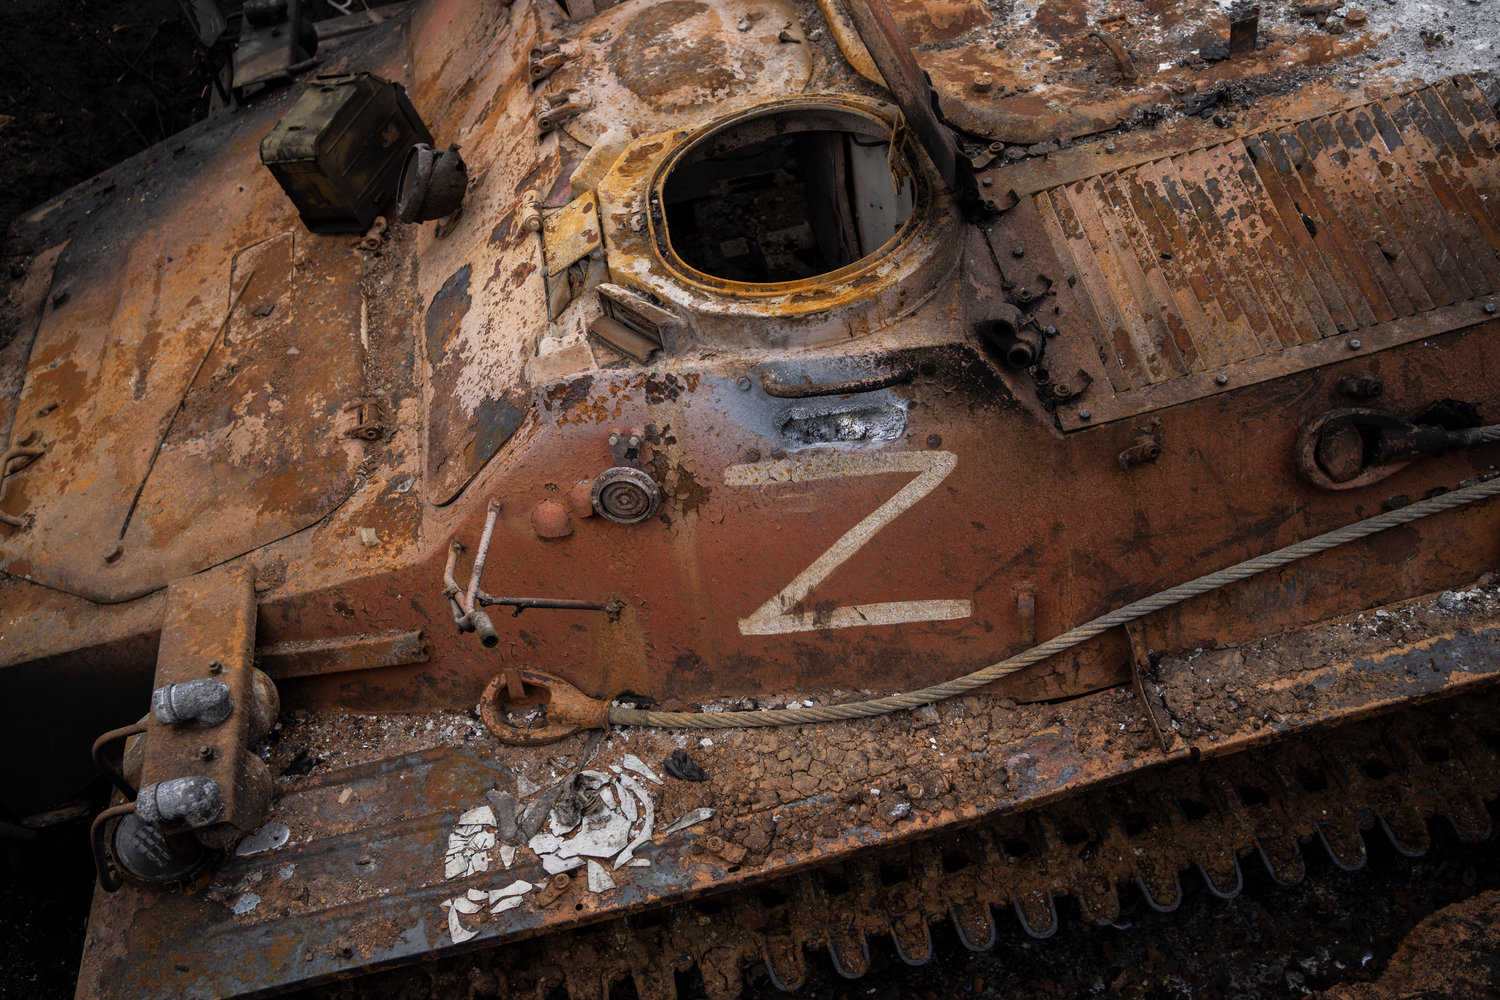 The letter Z, which has become the Russian emblem for the war, is seen on a Russian APC near Kutuzivka, Ukraine, Friday.